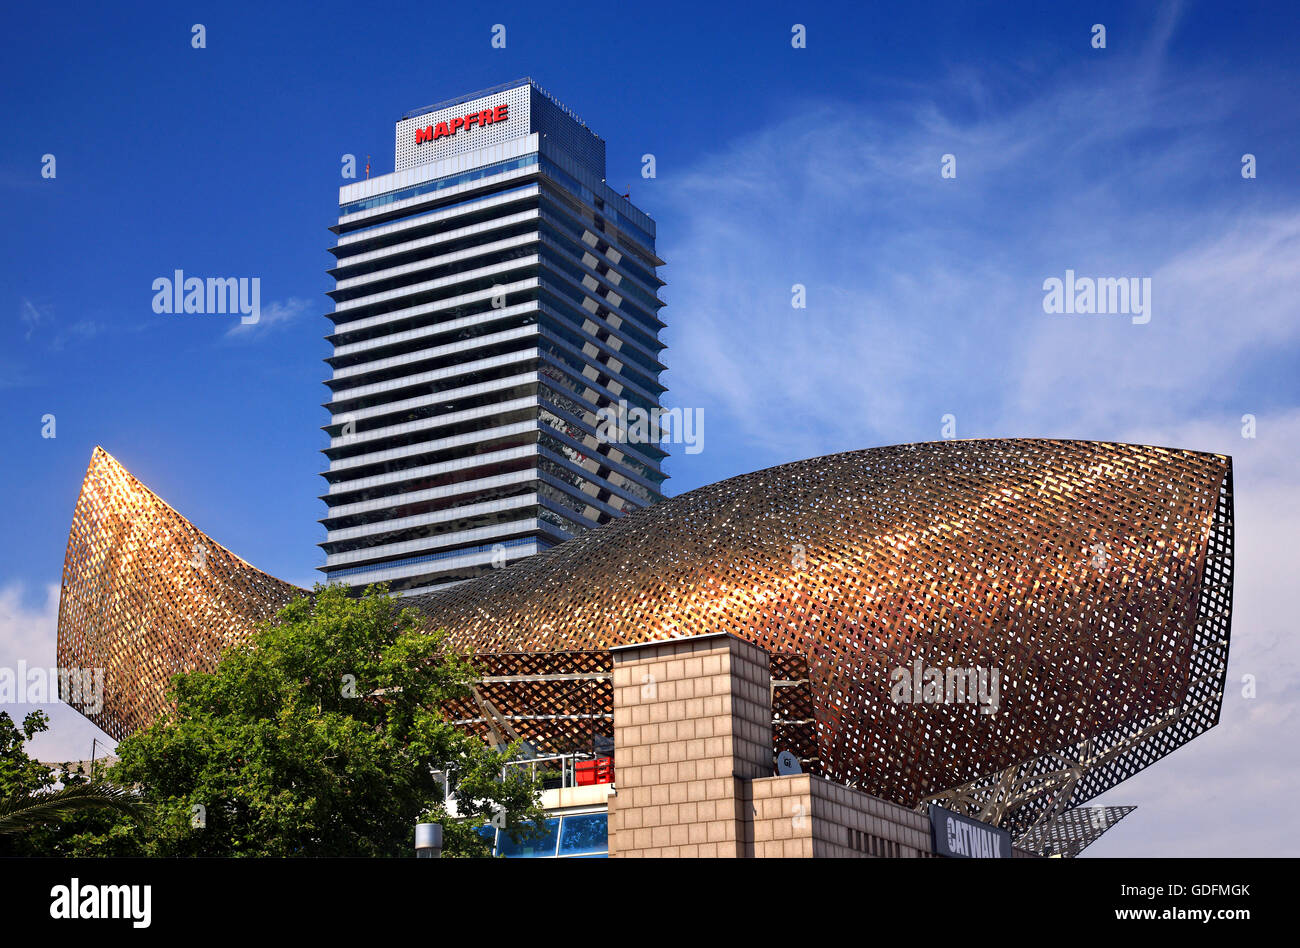 The 'Fish' ('Peix') by Frank Gehry, close to the Olympic port of Barcelona, Catalonia, Spain. Stock Photo